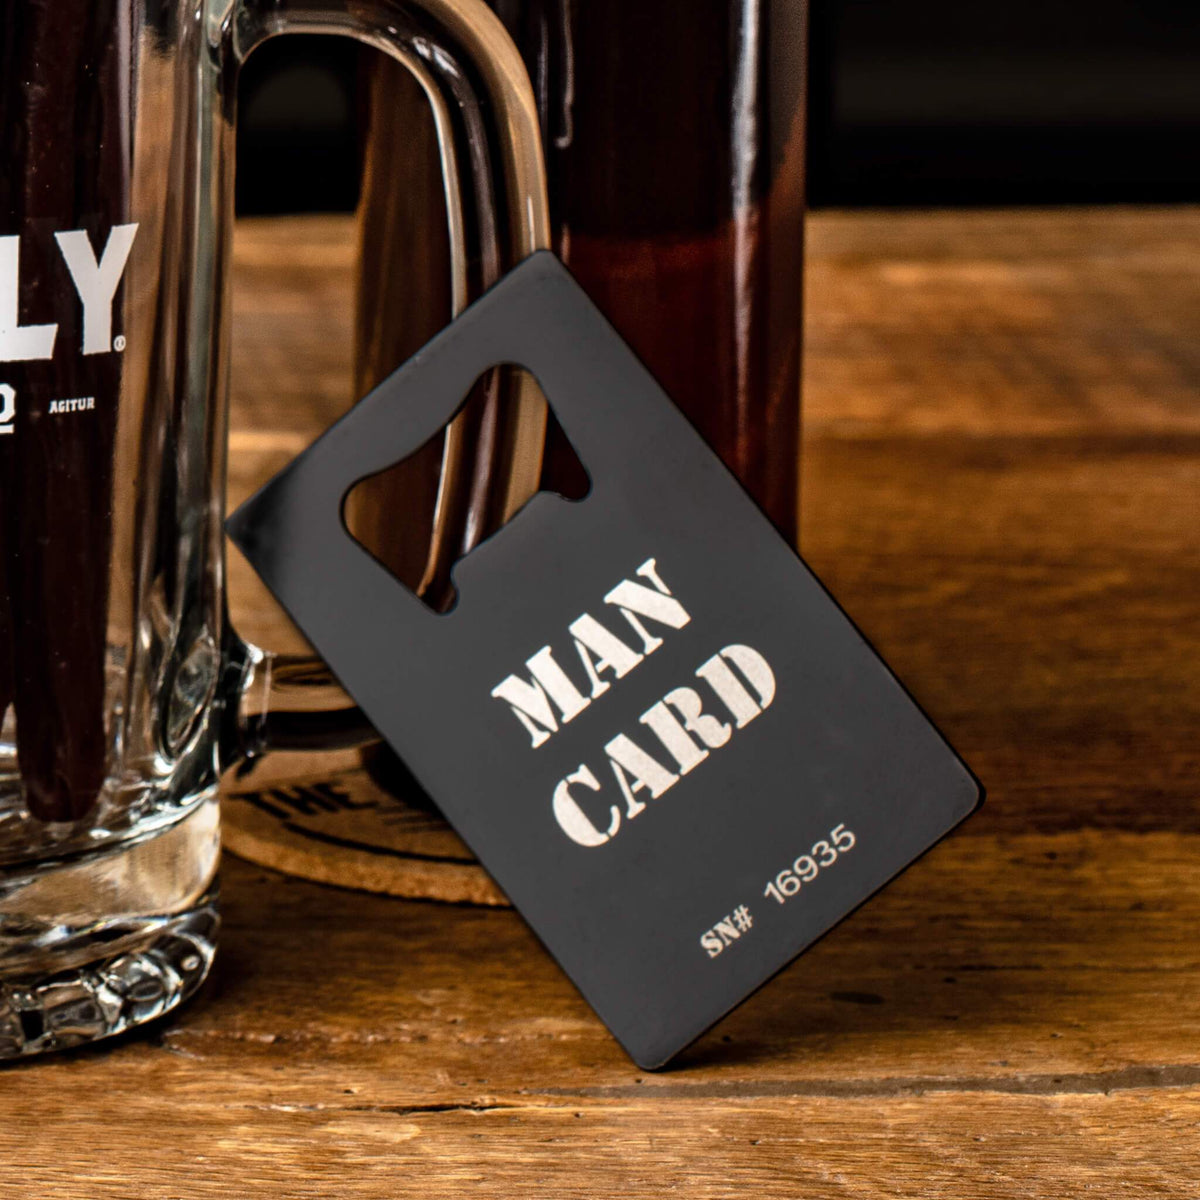 The Official MAN CARD (Bottle Opener)